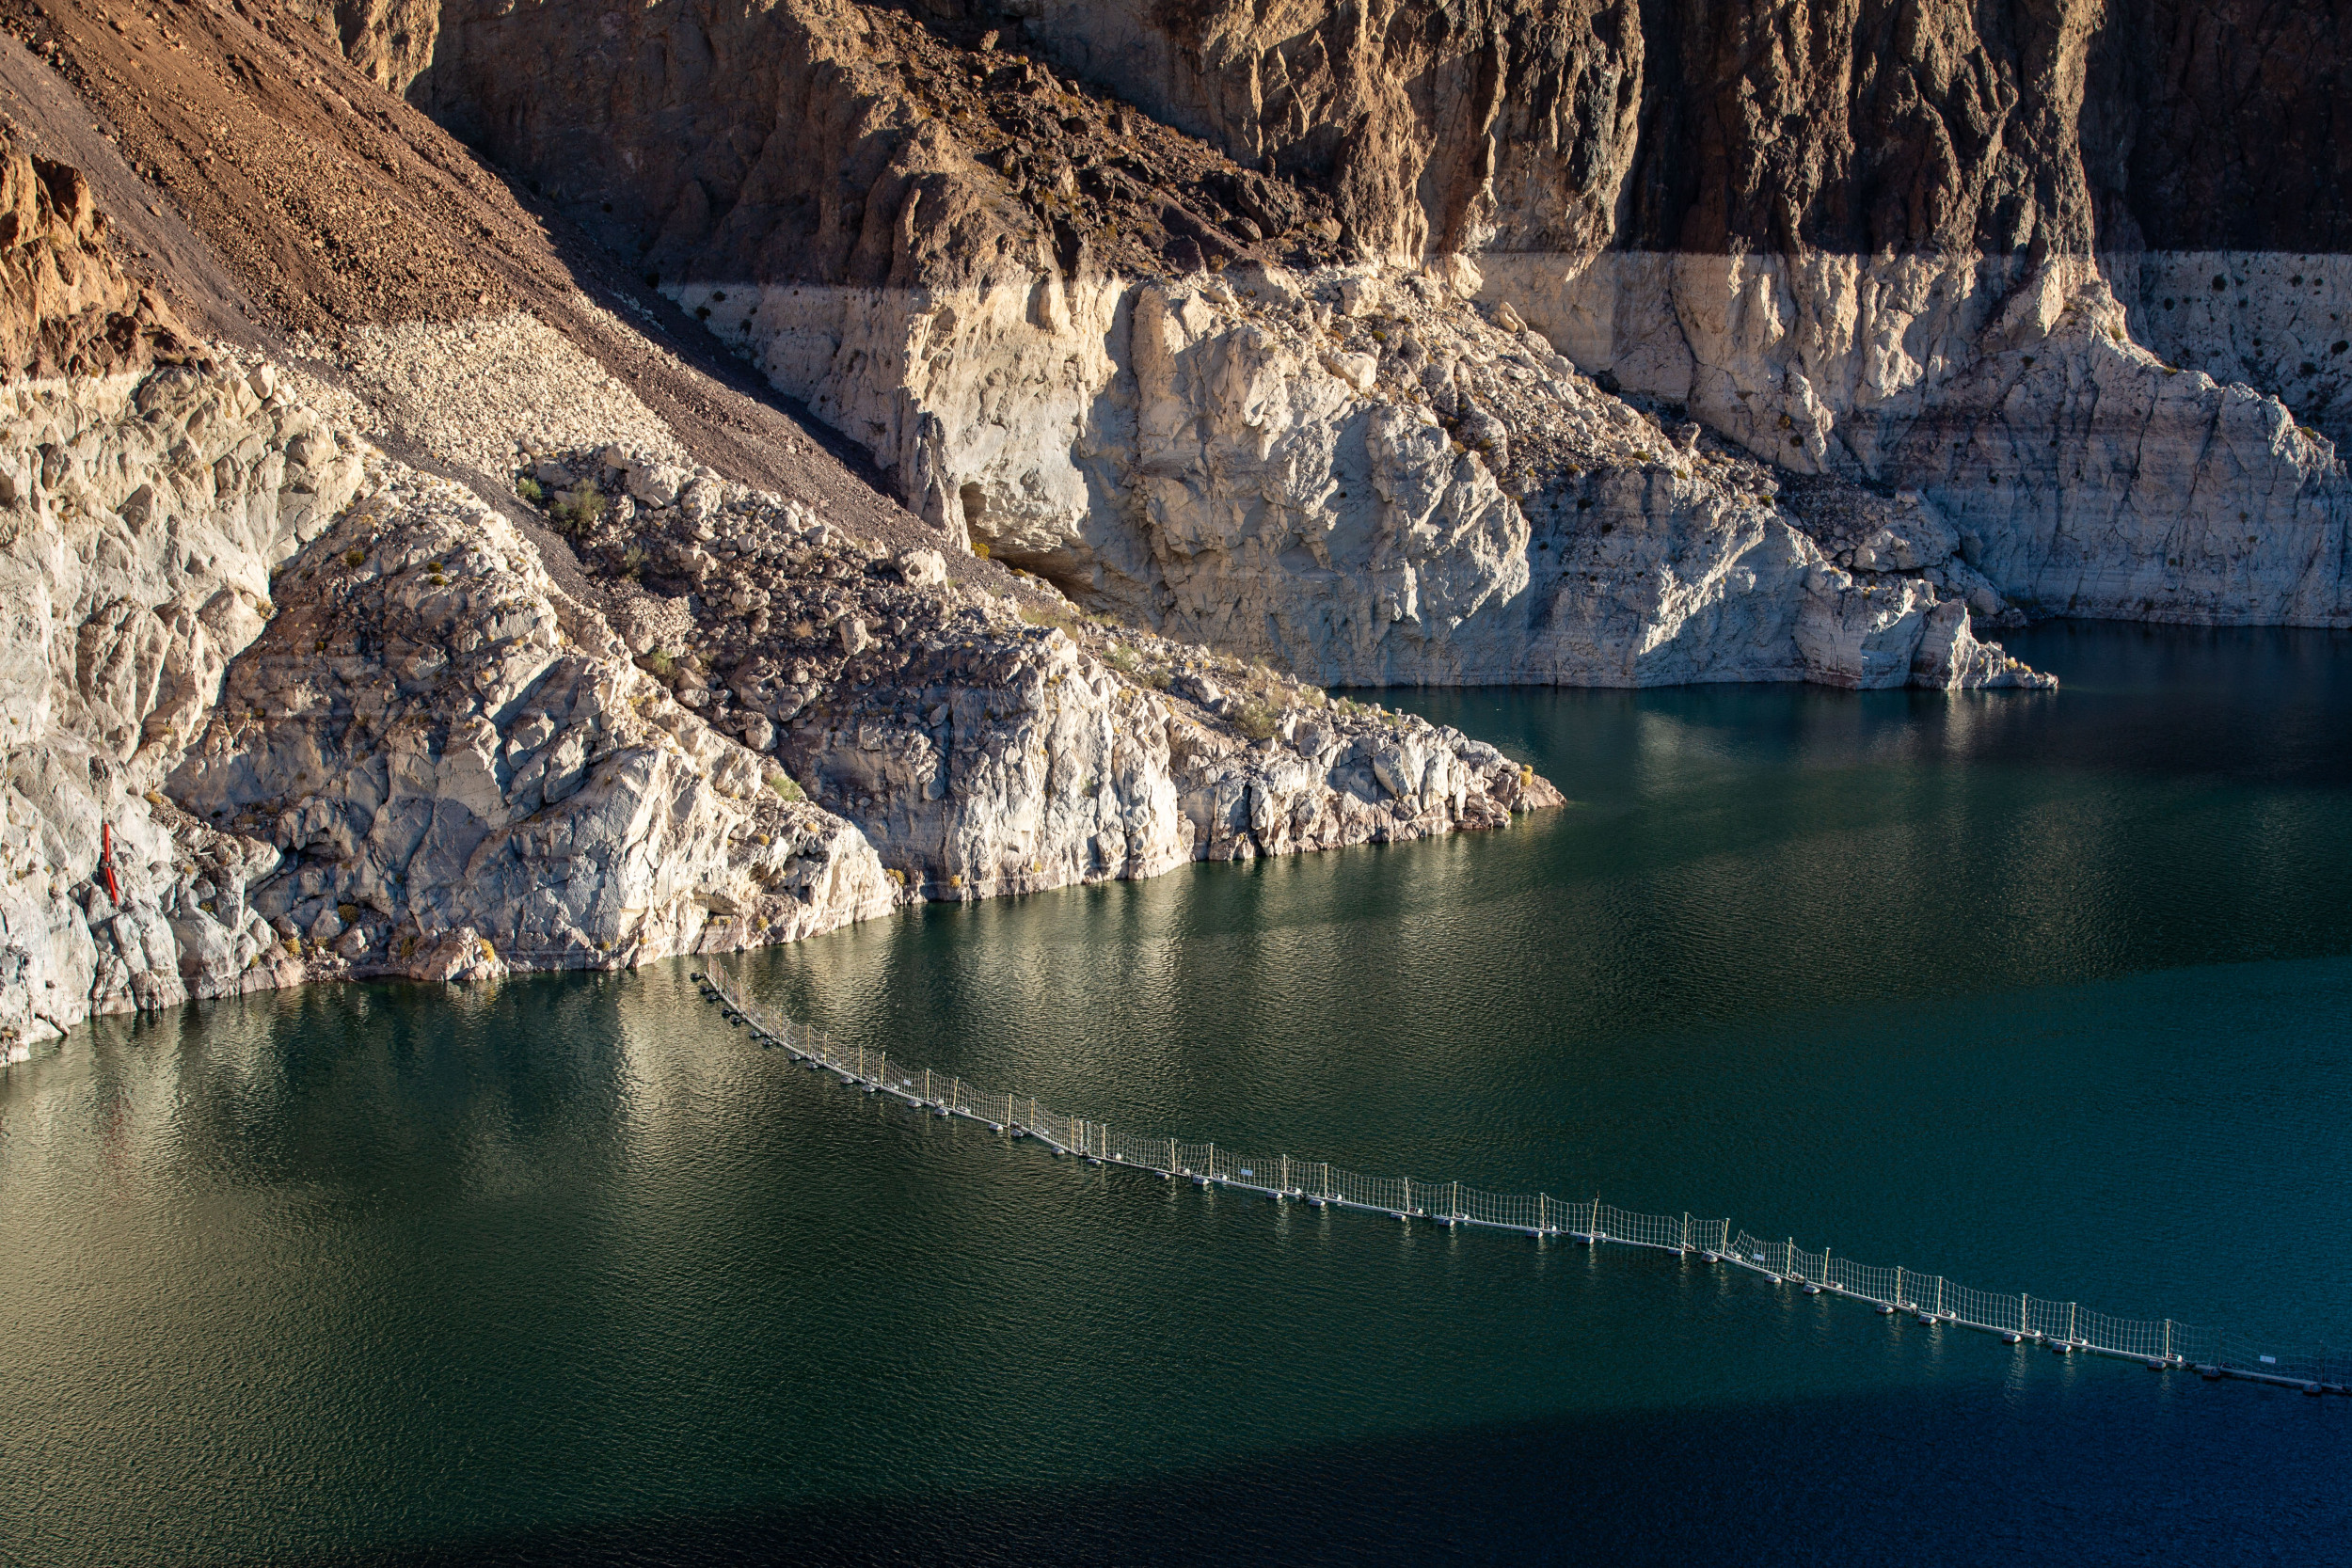 Rare BrainEating Amoeba Sparks Warning About Lake Mead's Water